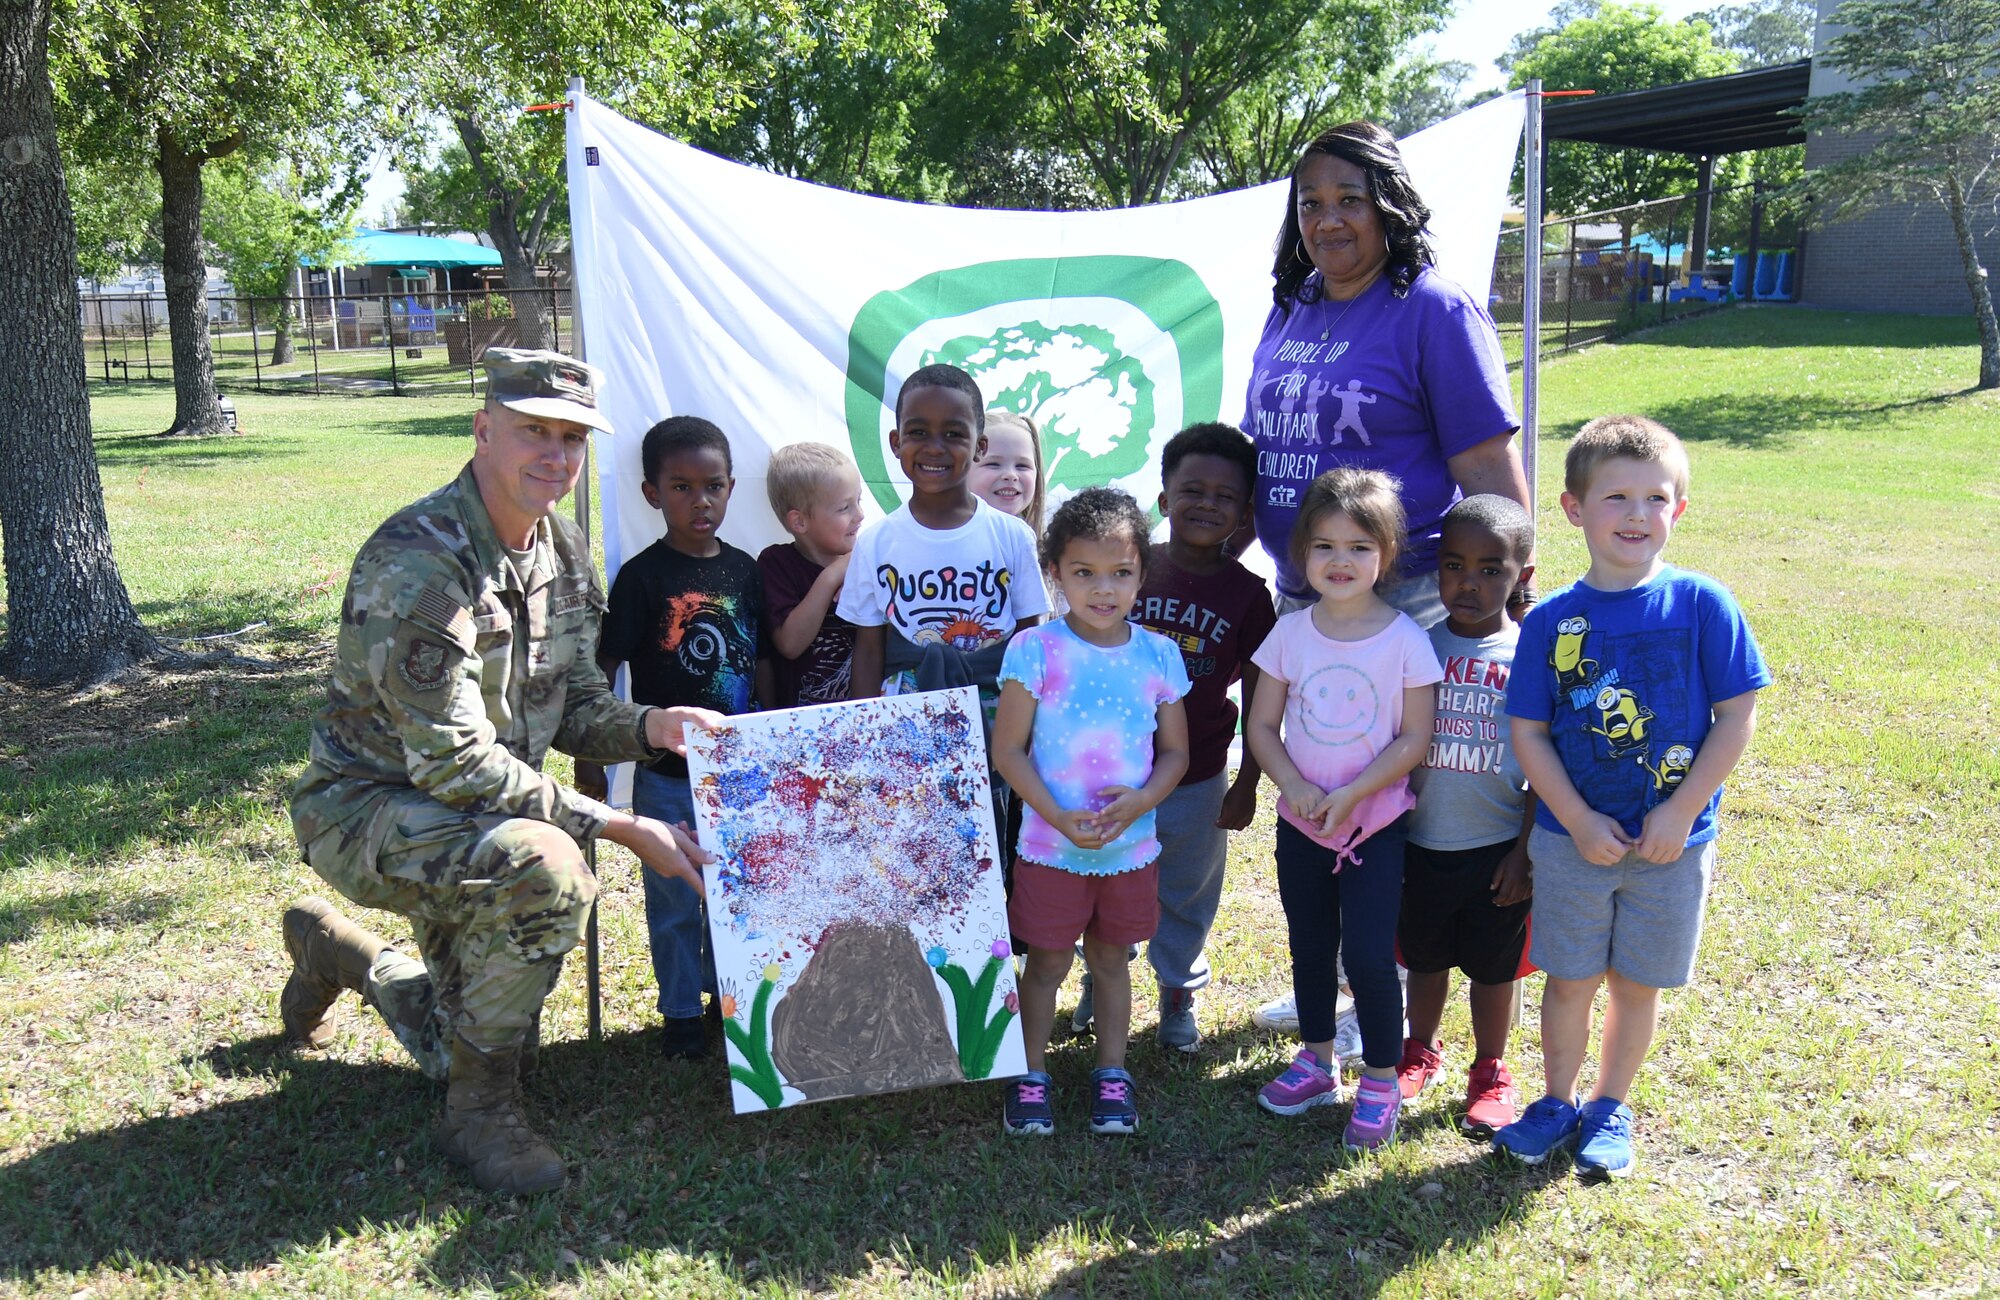 U.S. Air Force Col. William Hunter, 81st Training Wing commander, and children from the Keesler Child Development Center pose for a photo with a painting they made during the Arbor Day Celebration at Keesler Air Force Base, Mississippi, April 28, 2022. A tree planting ceremony and a Tree City USA flag presentation also took place at the event. (U.S. Air Force photo by Kemberly Groue)